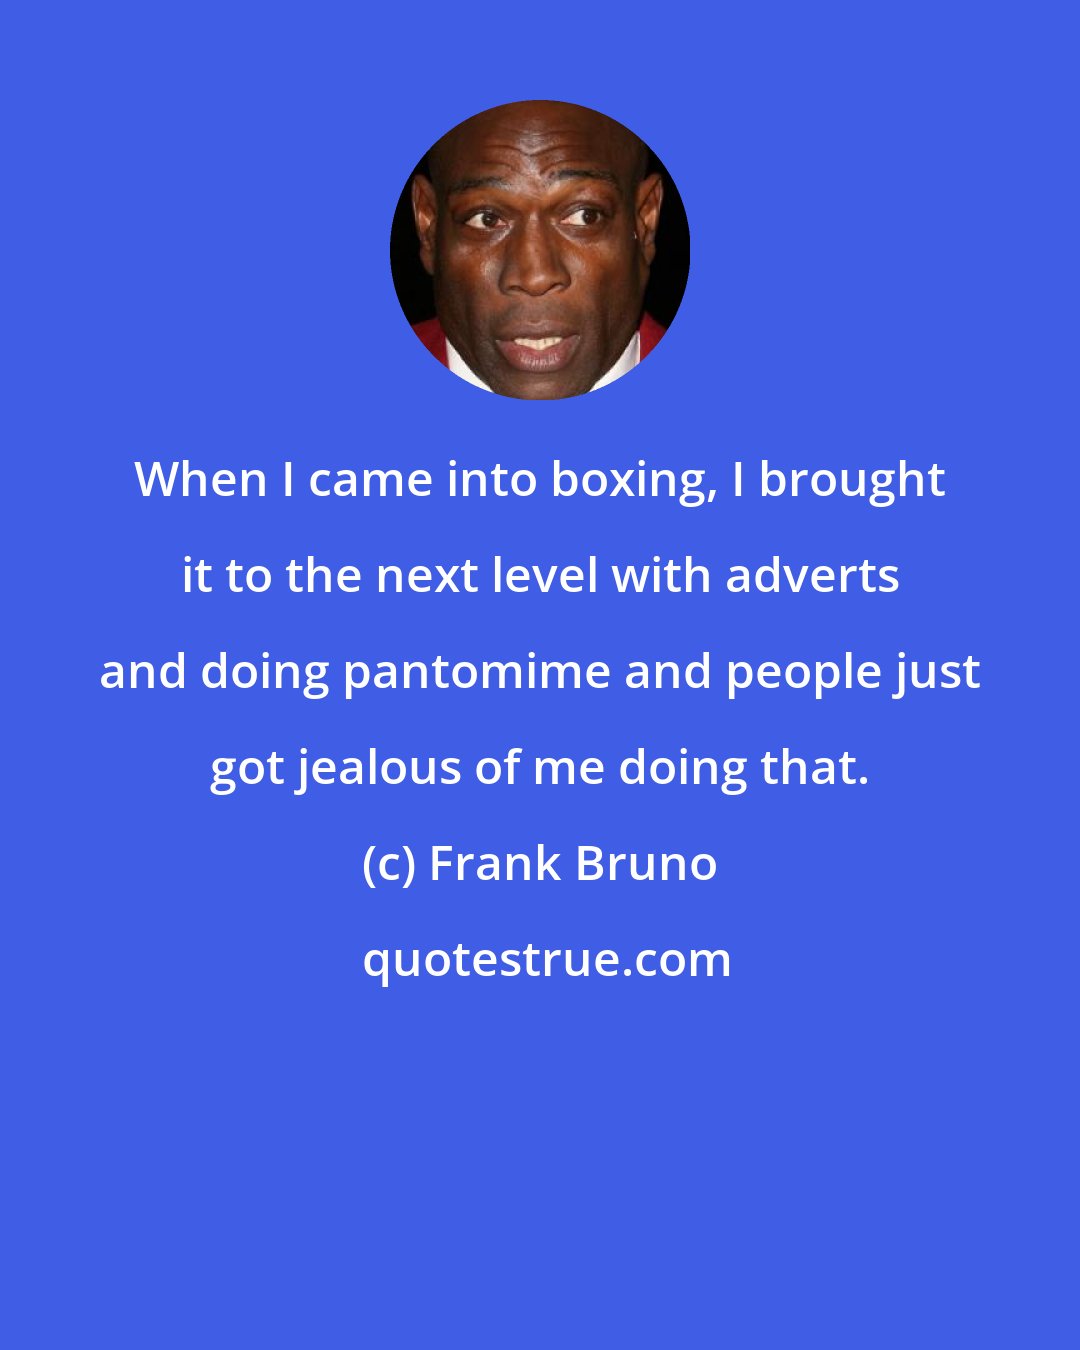 Frank Bruno: When I came into boxing, I brought it to the next level with adverts and doing pantomime and people just got jealous of me doing that.